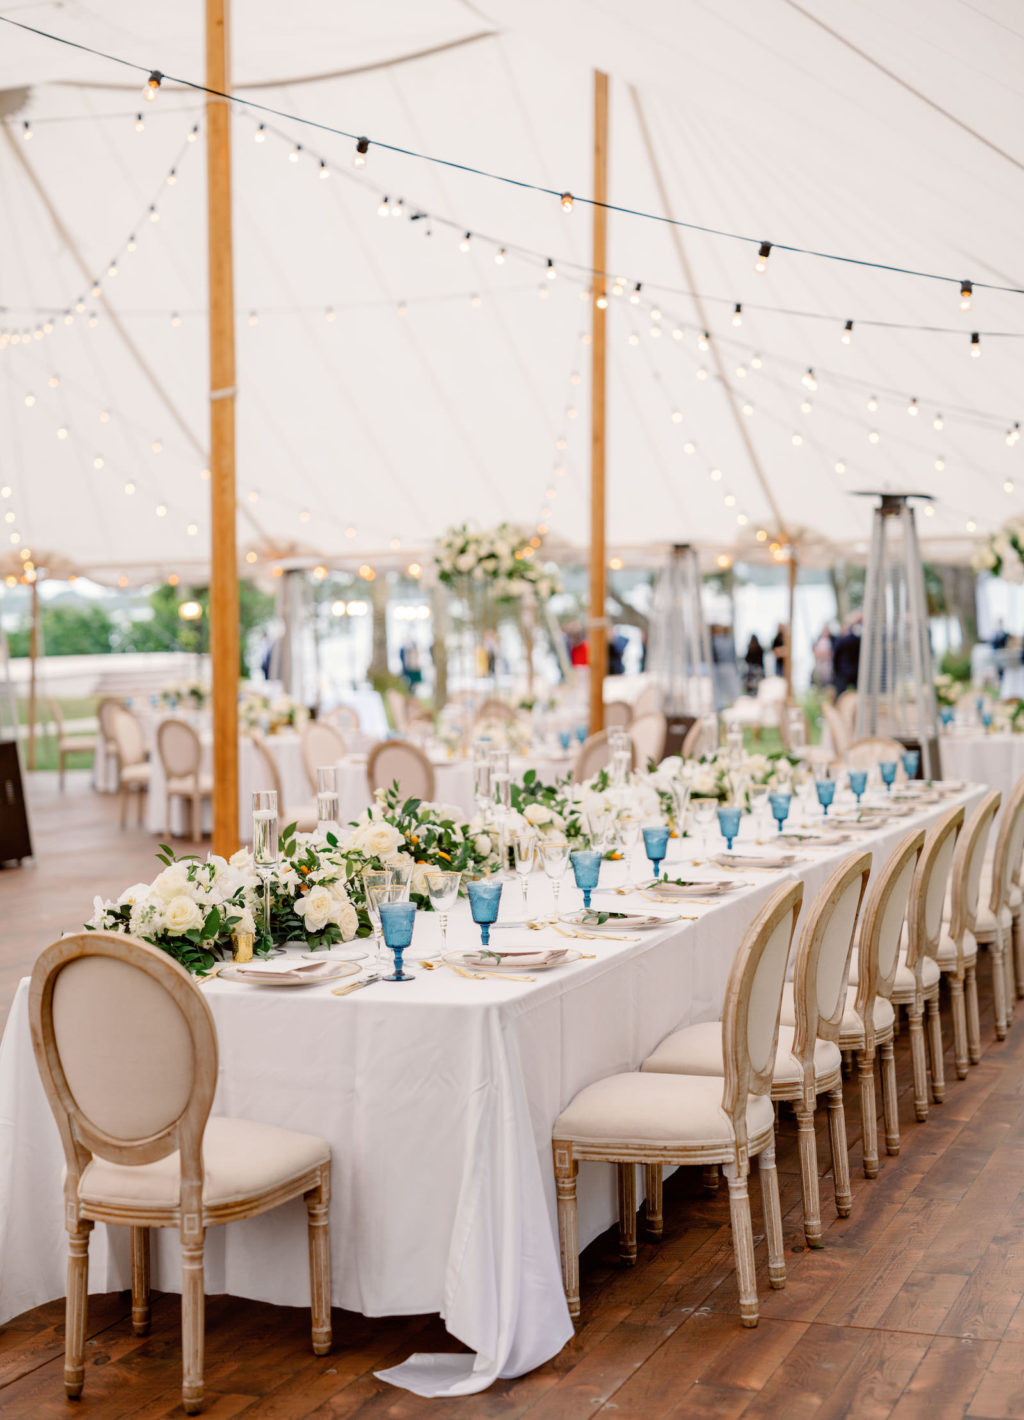 Elegant Luxurious Wedding Tent Reception Decor, Long Feasting Table with White Linens, Blue Glasses and White with Greenery Floral Arrangements, Bistro Hanging Lights Wooden and French Country Dining Chairs | Tampa Bay NK Productions Wedding Planning